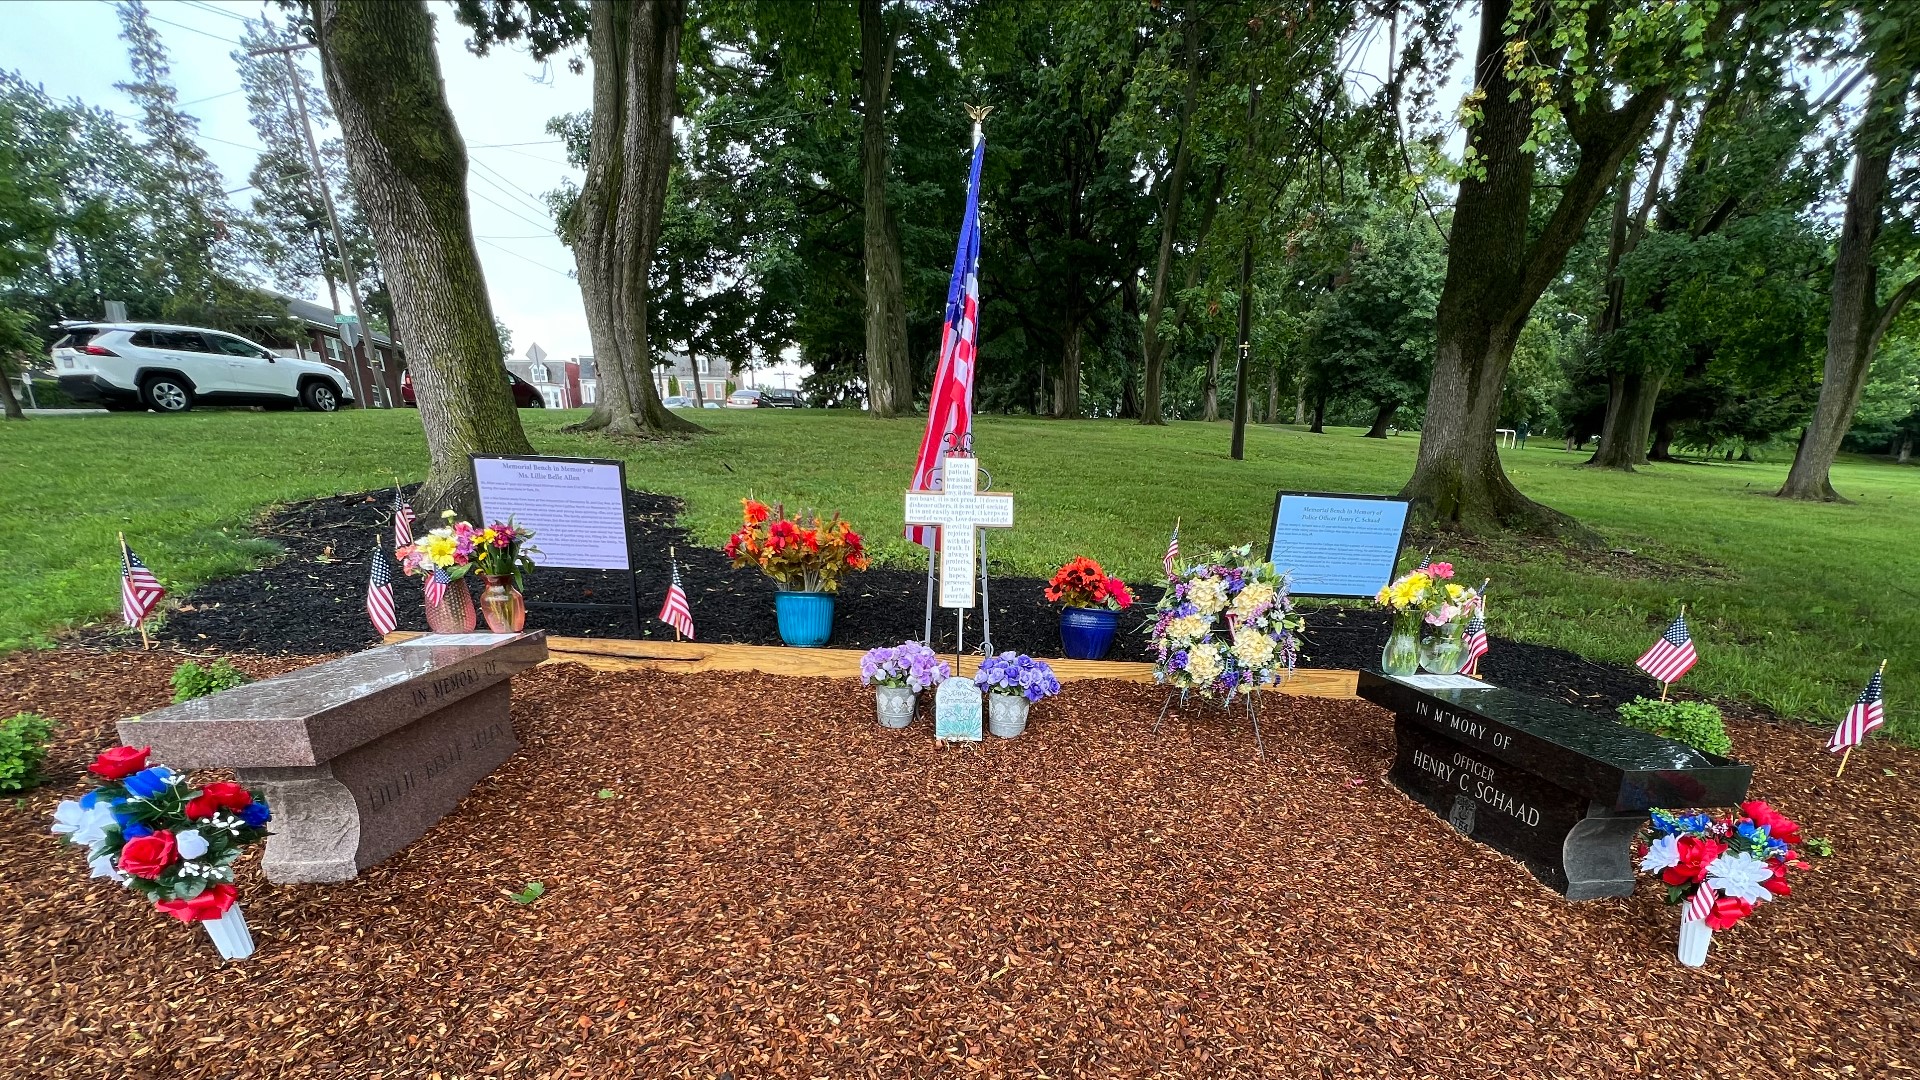 A prayer vigil for Lillie Belle Allen and Officer Henry Schaad, two victims of the 1969 York race riot, will take place in their memory tonight.